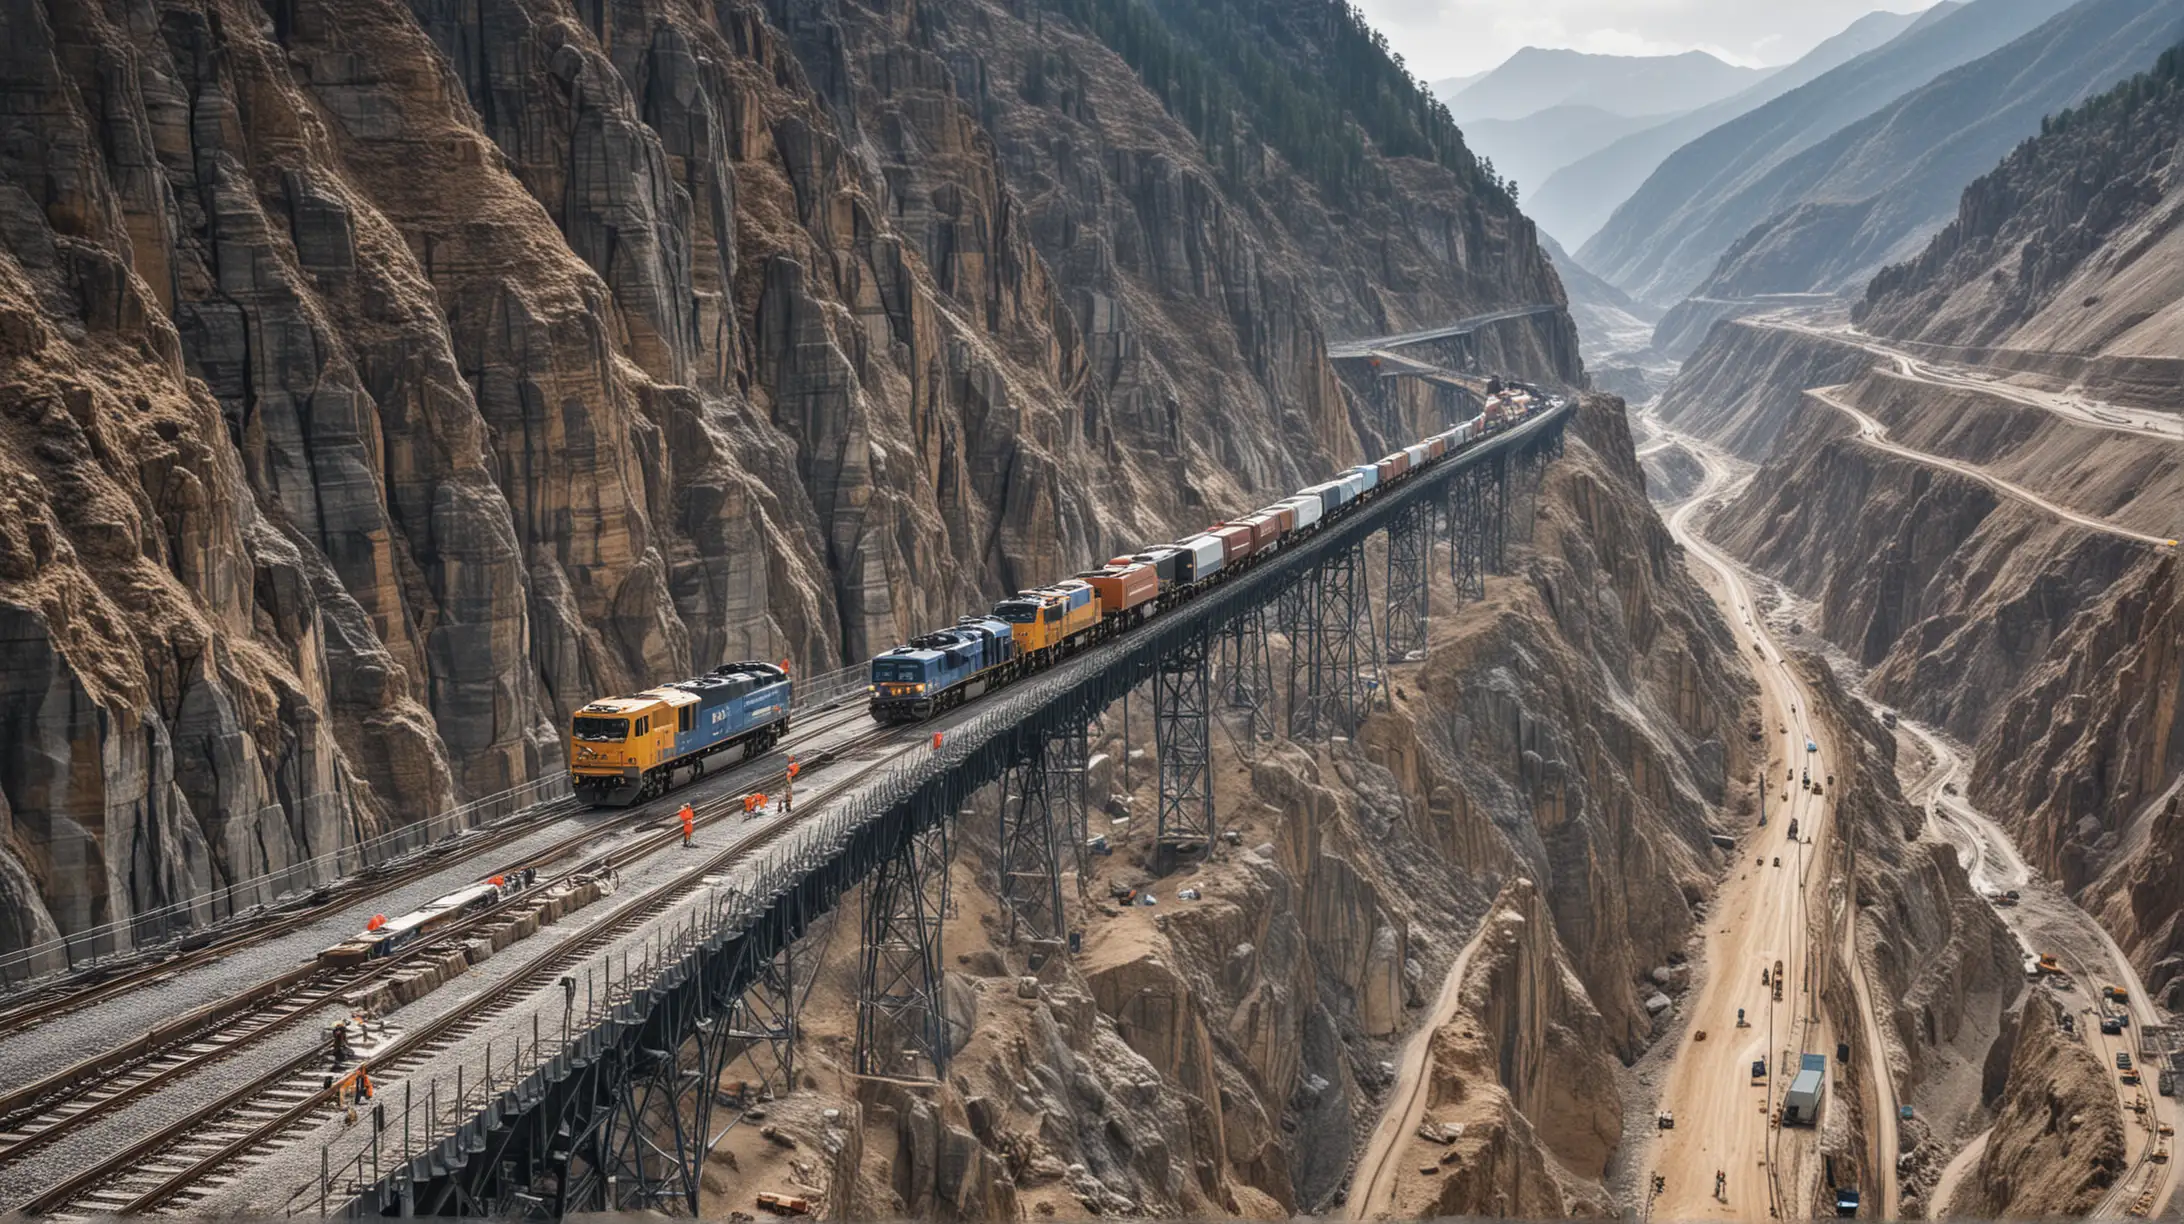 Challenging Mountainous Rail Line Construction with Workers and Machines